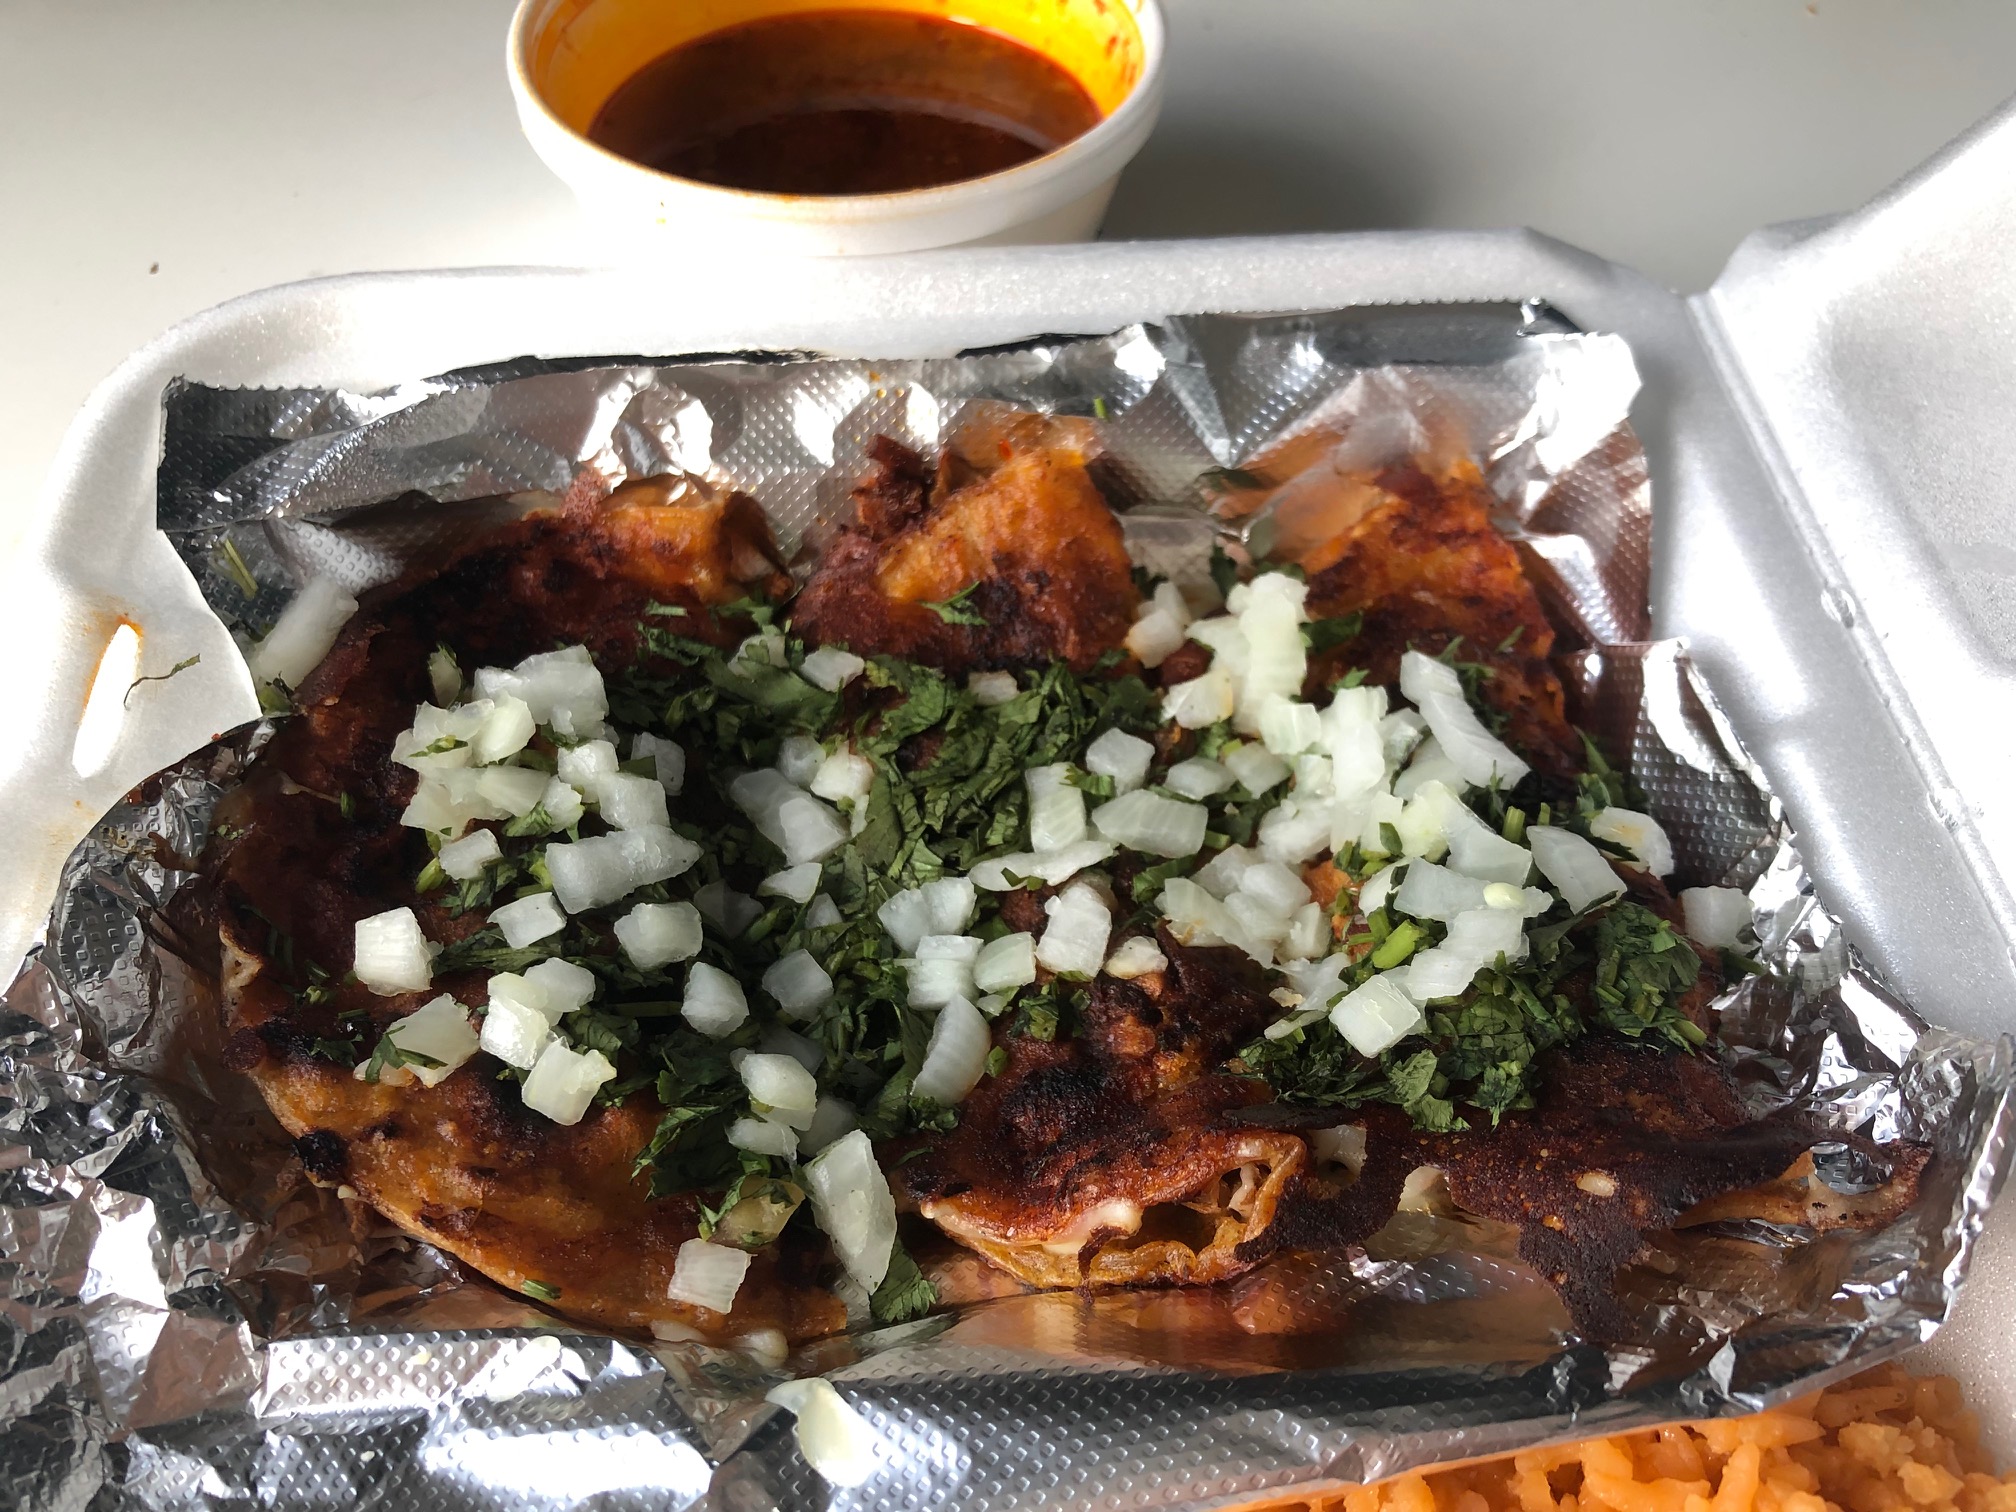 In a white styrofoam container, there are three birria tacos on tin foil. Photo by Alyssa Buckley.